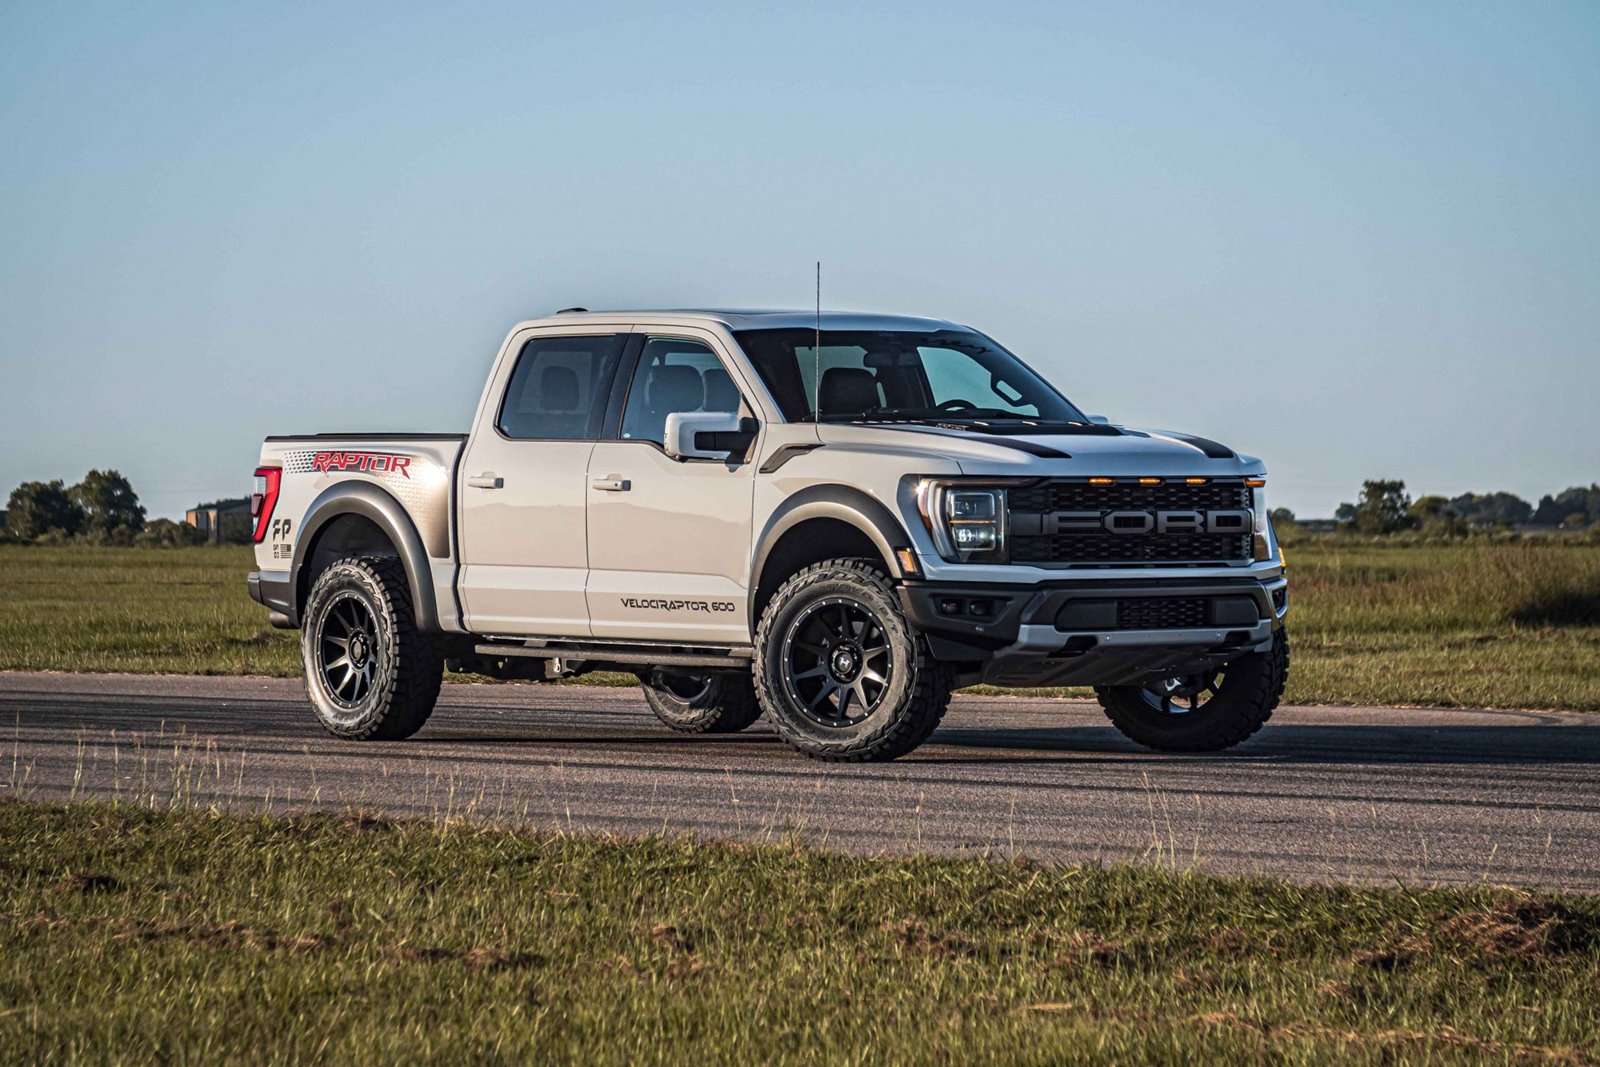 The Hennessey VelociRaptor 600 packs a lot of trinkets